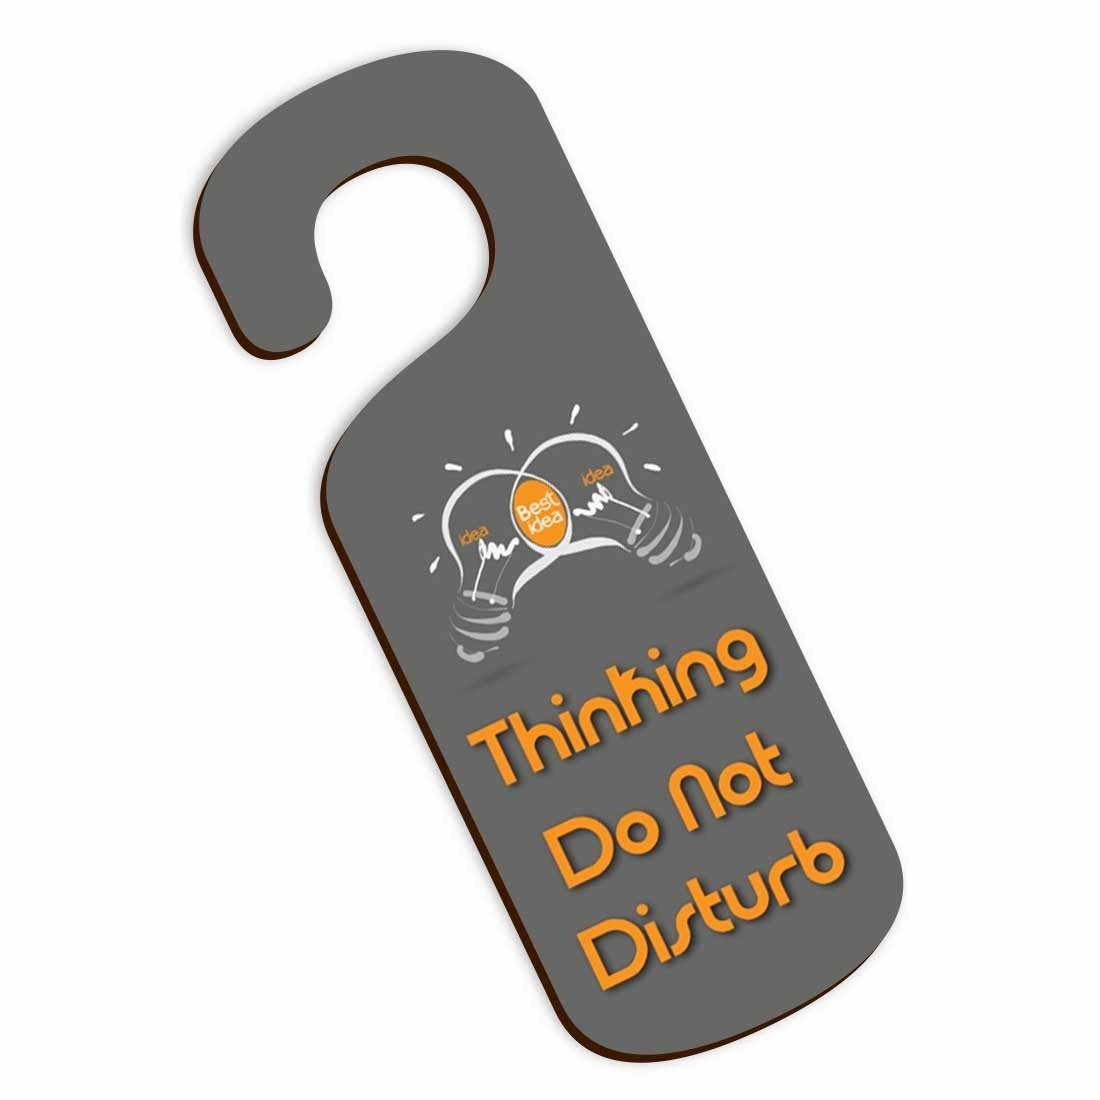 A grey door knob sign with the words &quot;Thinking, do not disturb&quot; written in orange on it